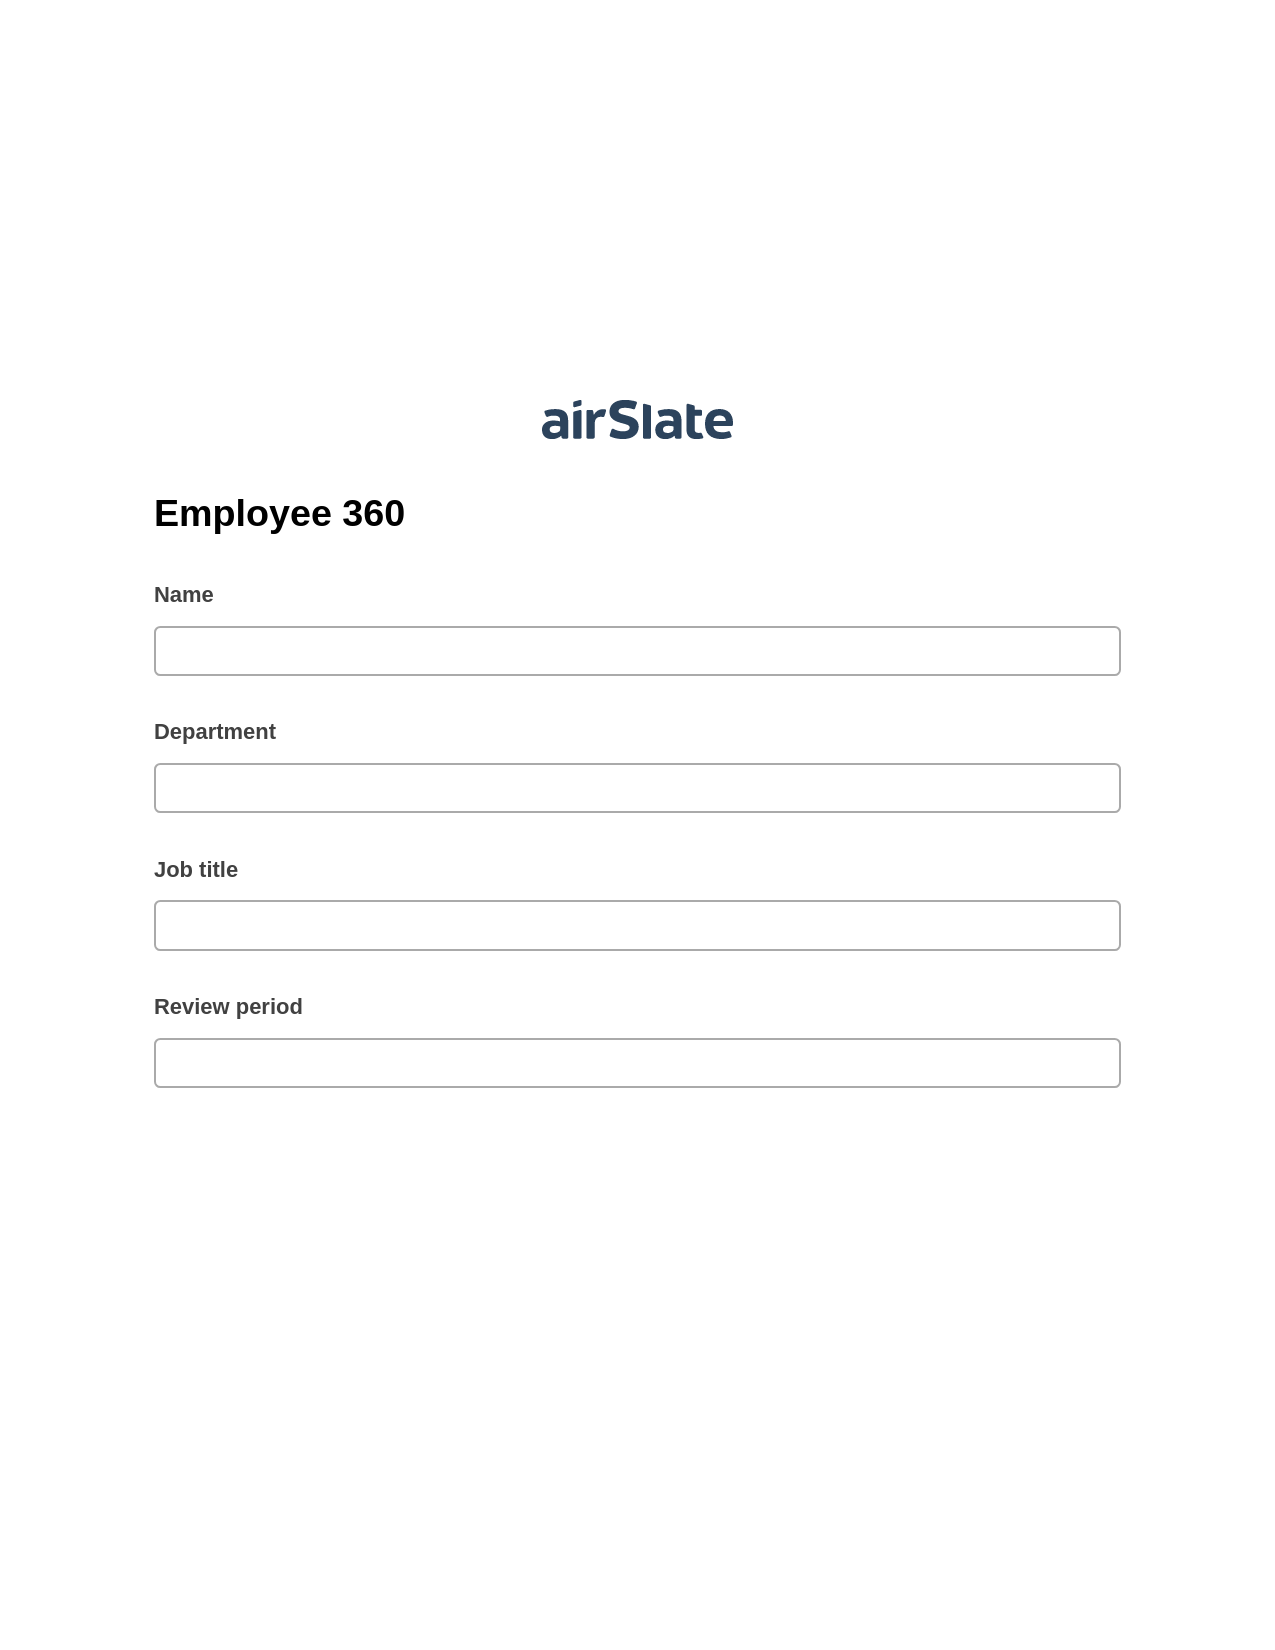 Employee 360 Pre-fill from CSV File Bot, Export to MS Dynamics 365 Bot, Slack Two-Way Binding Bot